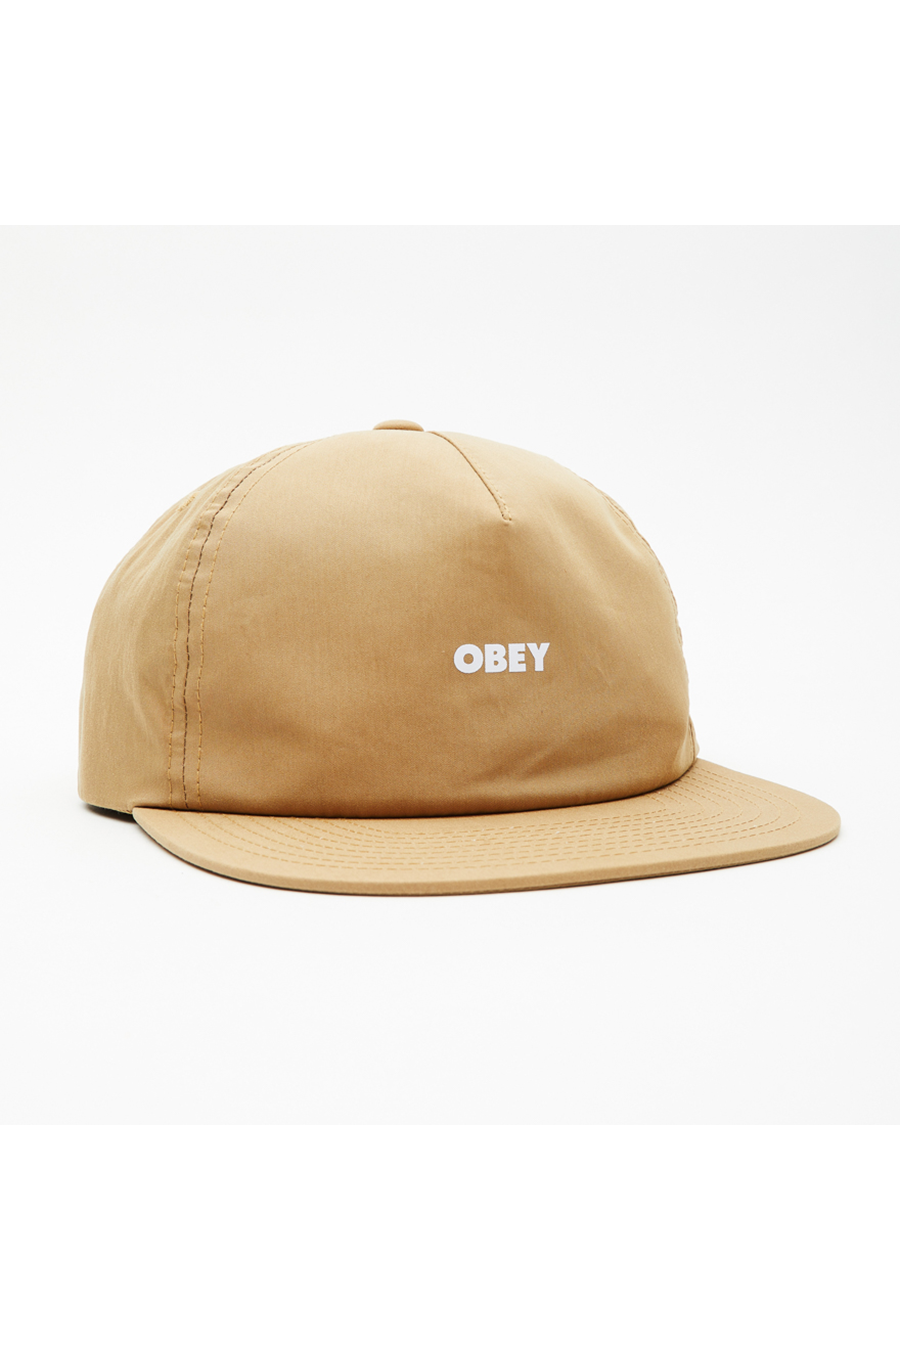 Obey Bold Tech Strapback | Rabbit Paw - Main Image Number 1 of 2